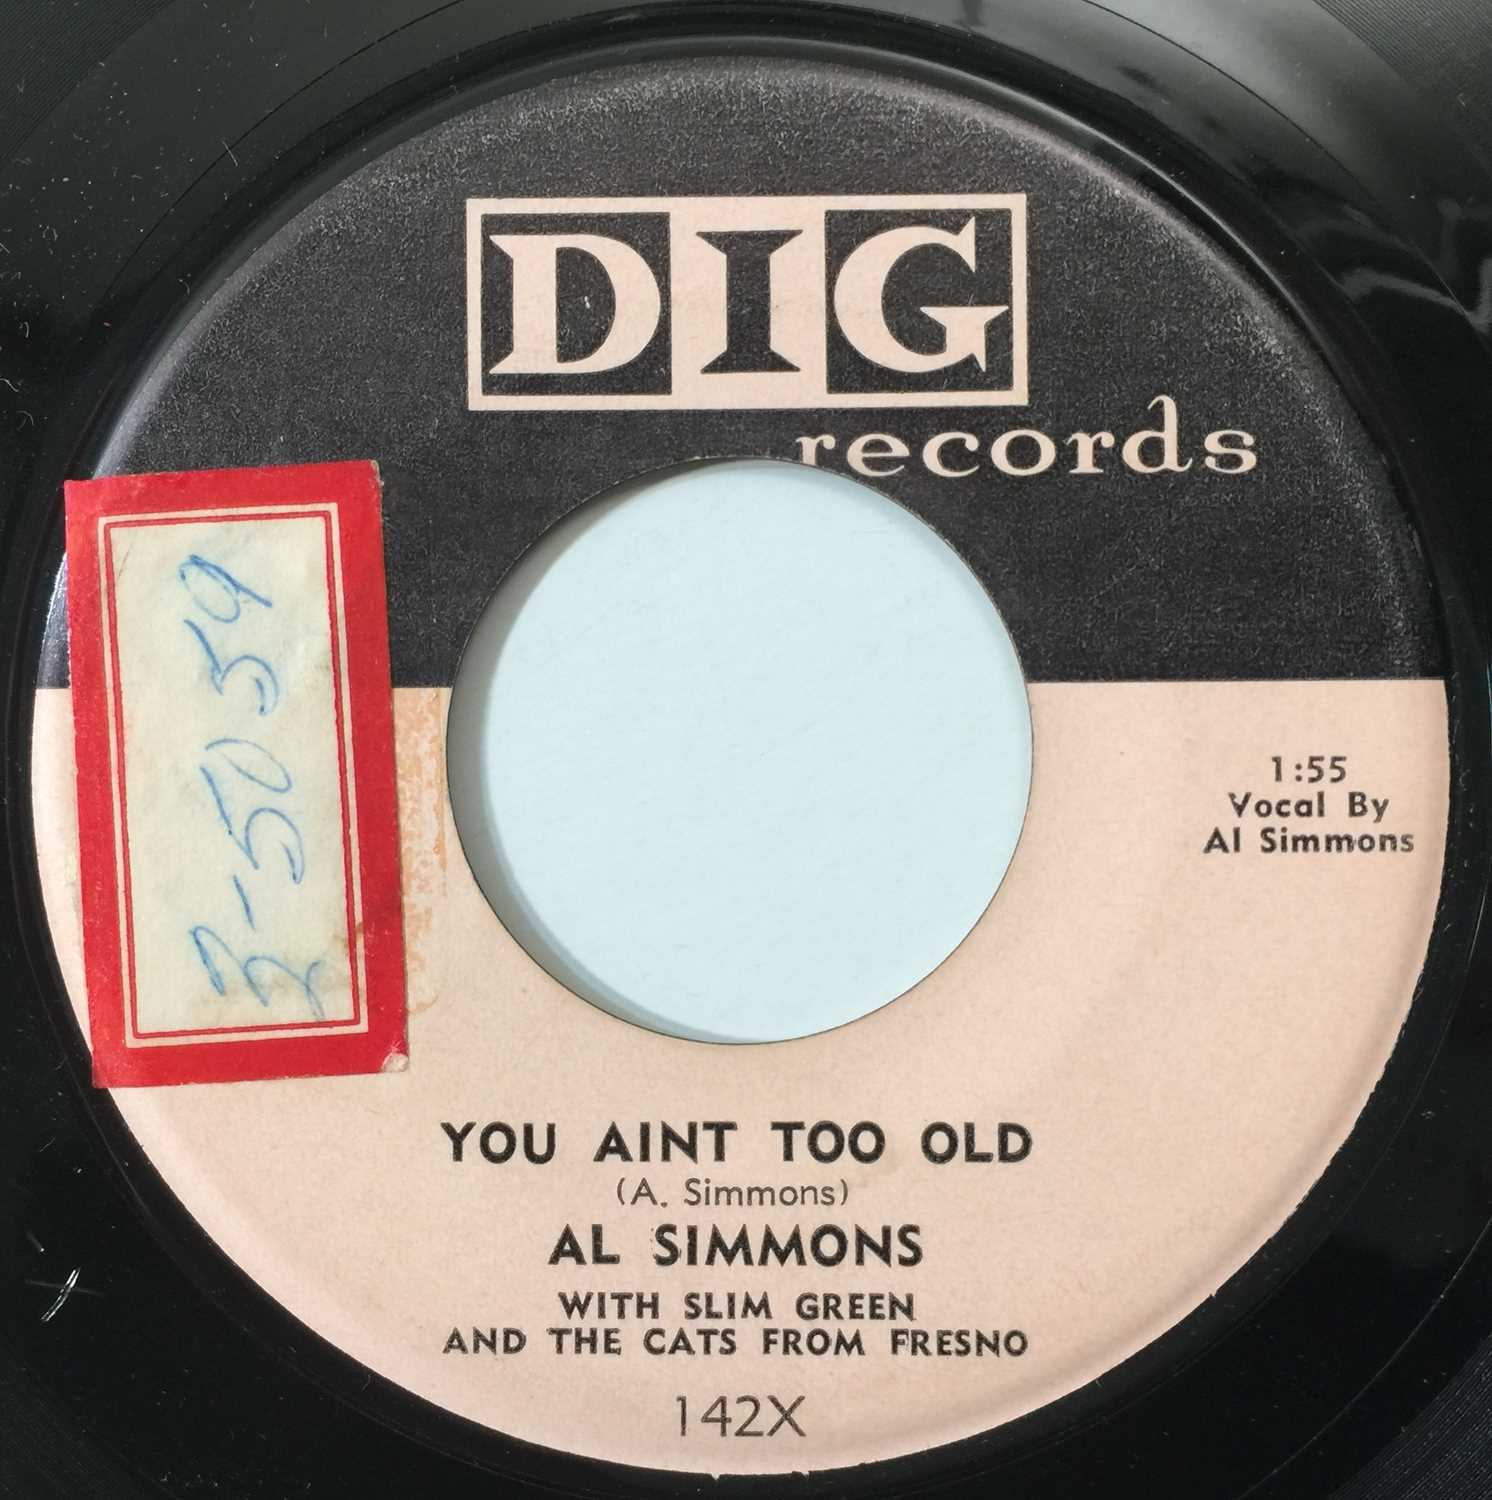 Lot 23 - AL SIMMONS/ SLIM GREEN - YOU AIN'T TOO OLD/ MY WOMAN DONE QUIT ME 7" (US R&B - DIG 142)